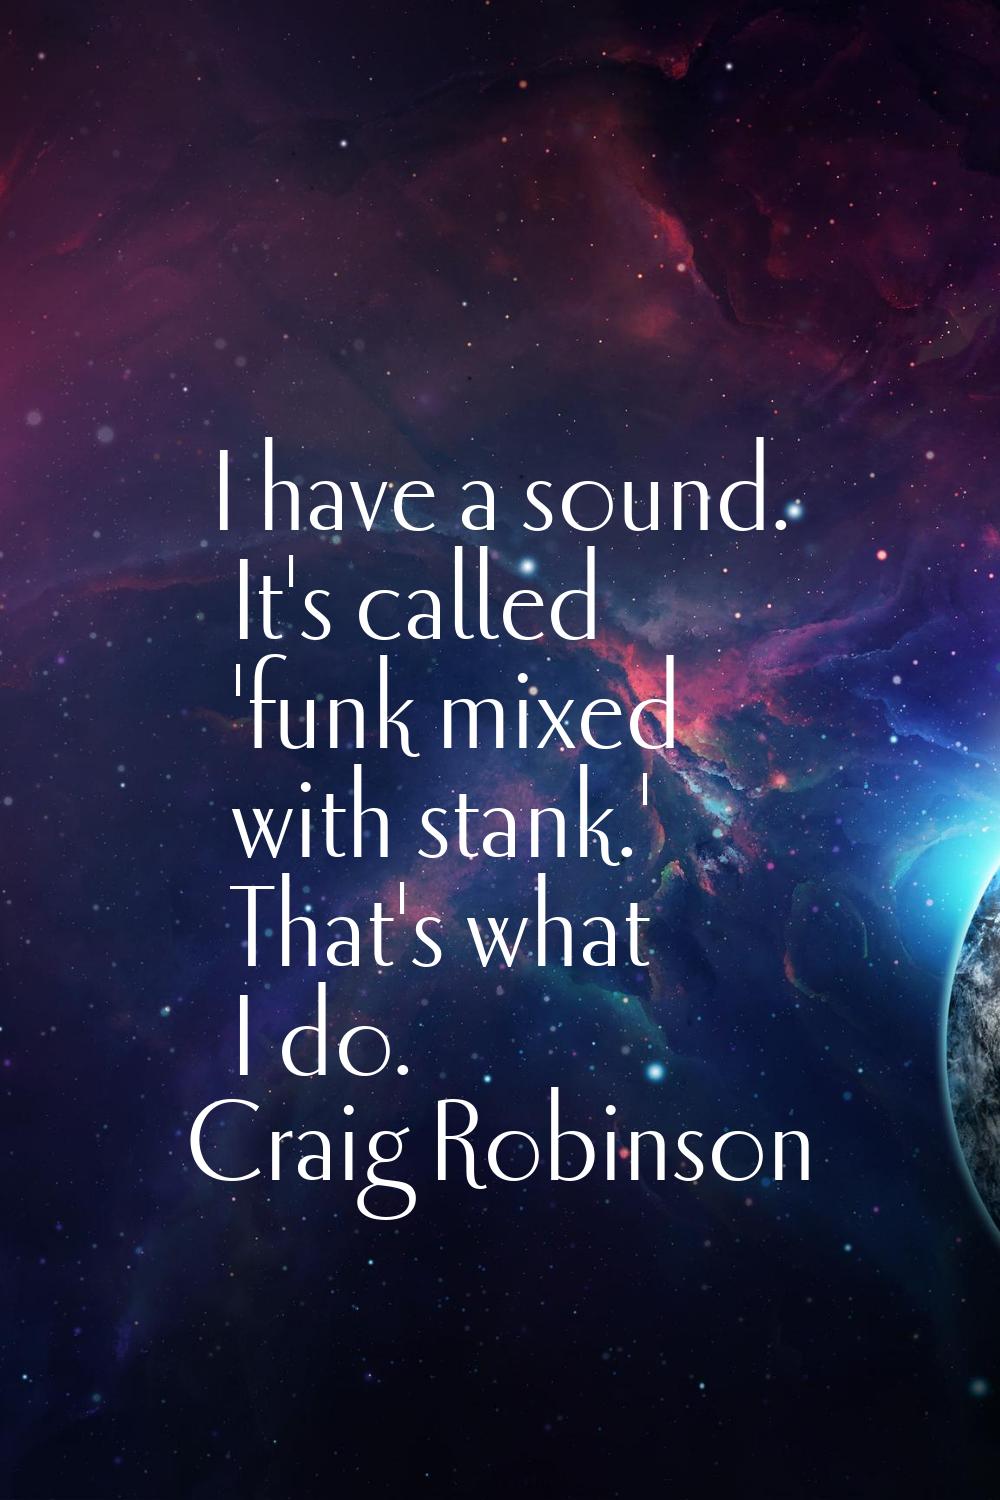 I have a sound. It's called 'funk mixed with stank.' That's what I do.